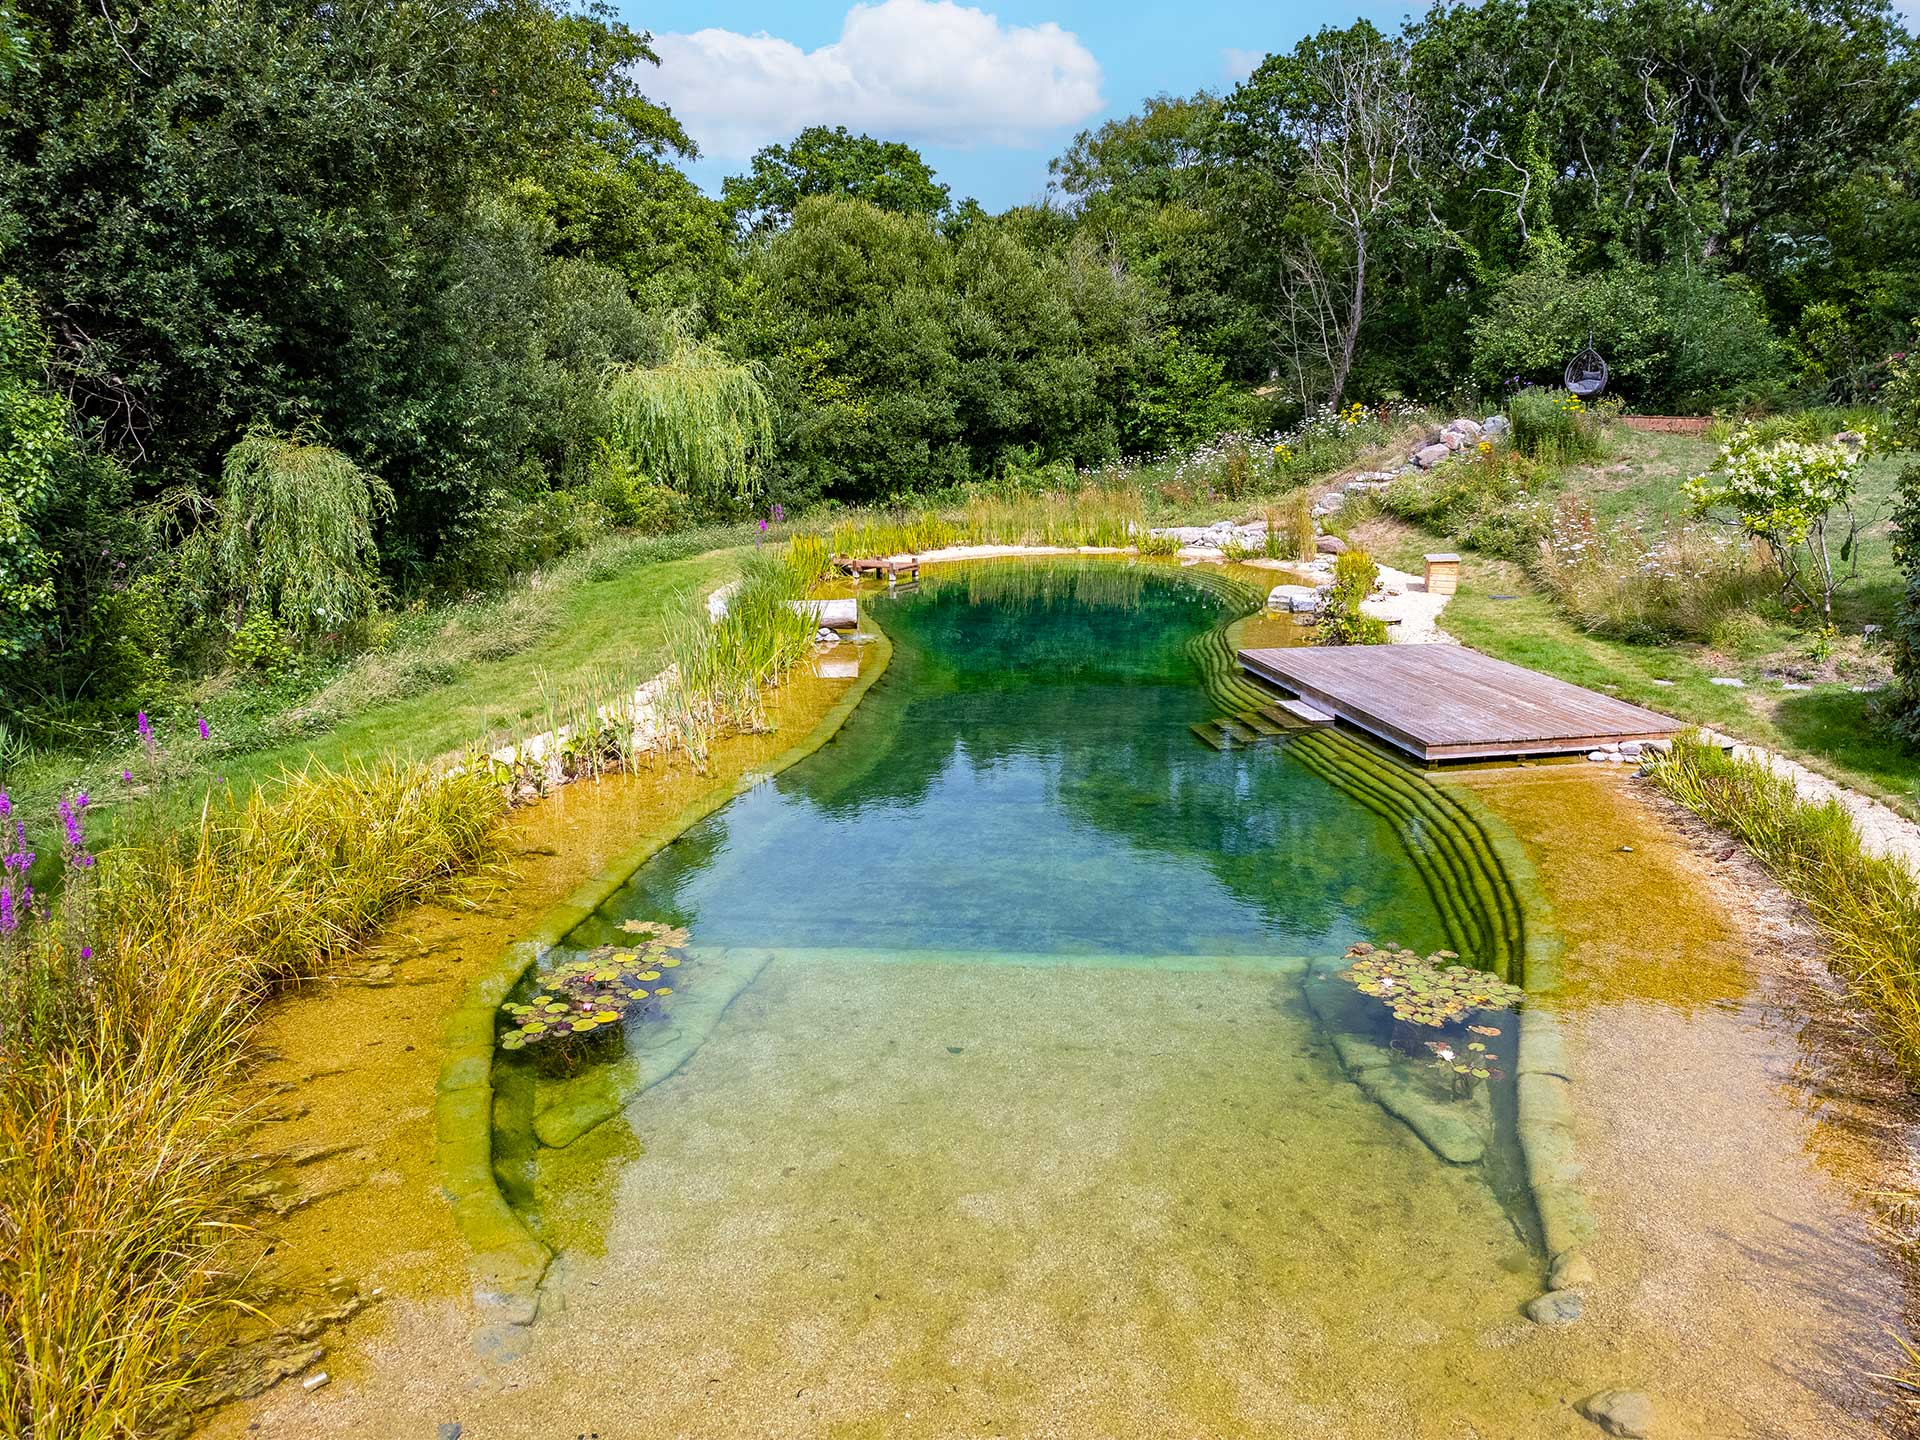 A natural swimming pond featuring crystal-clear waters